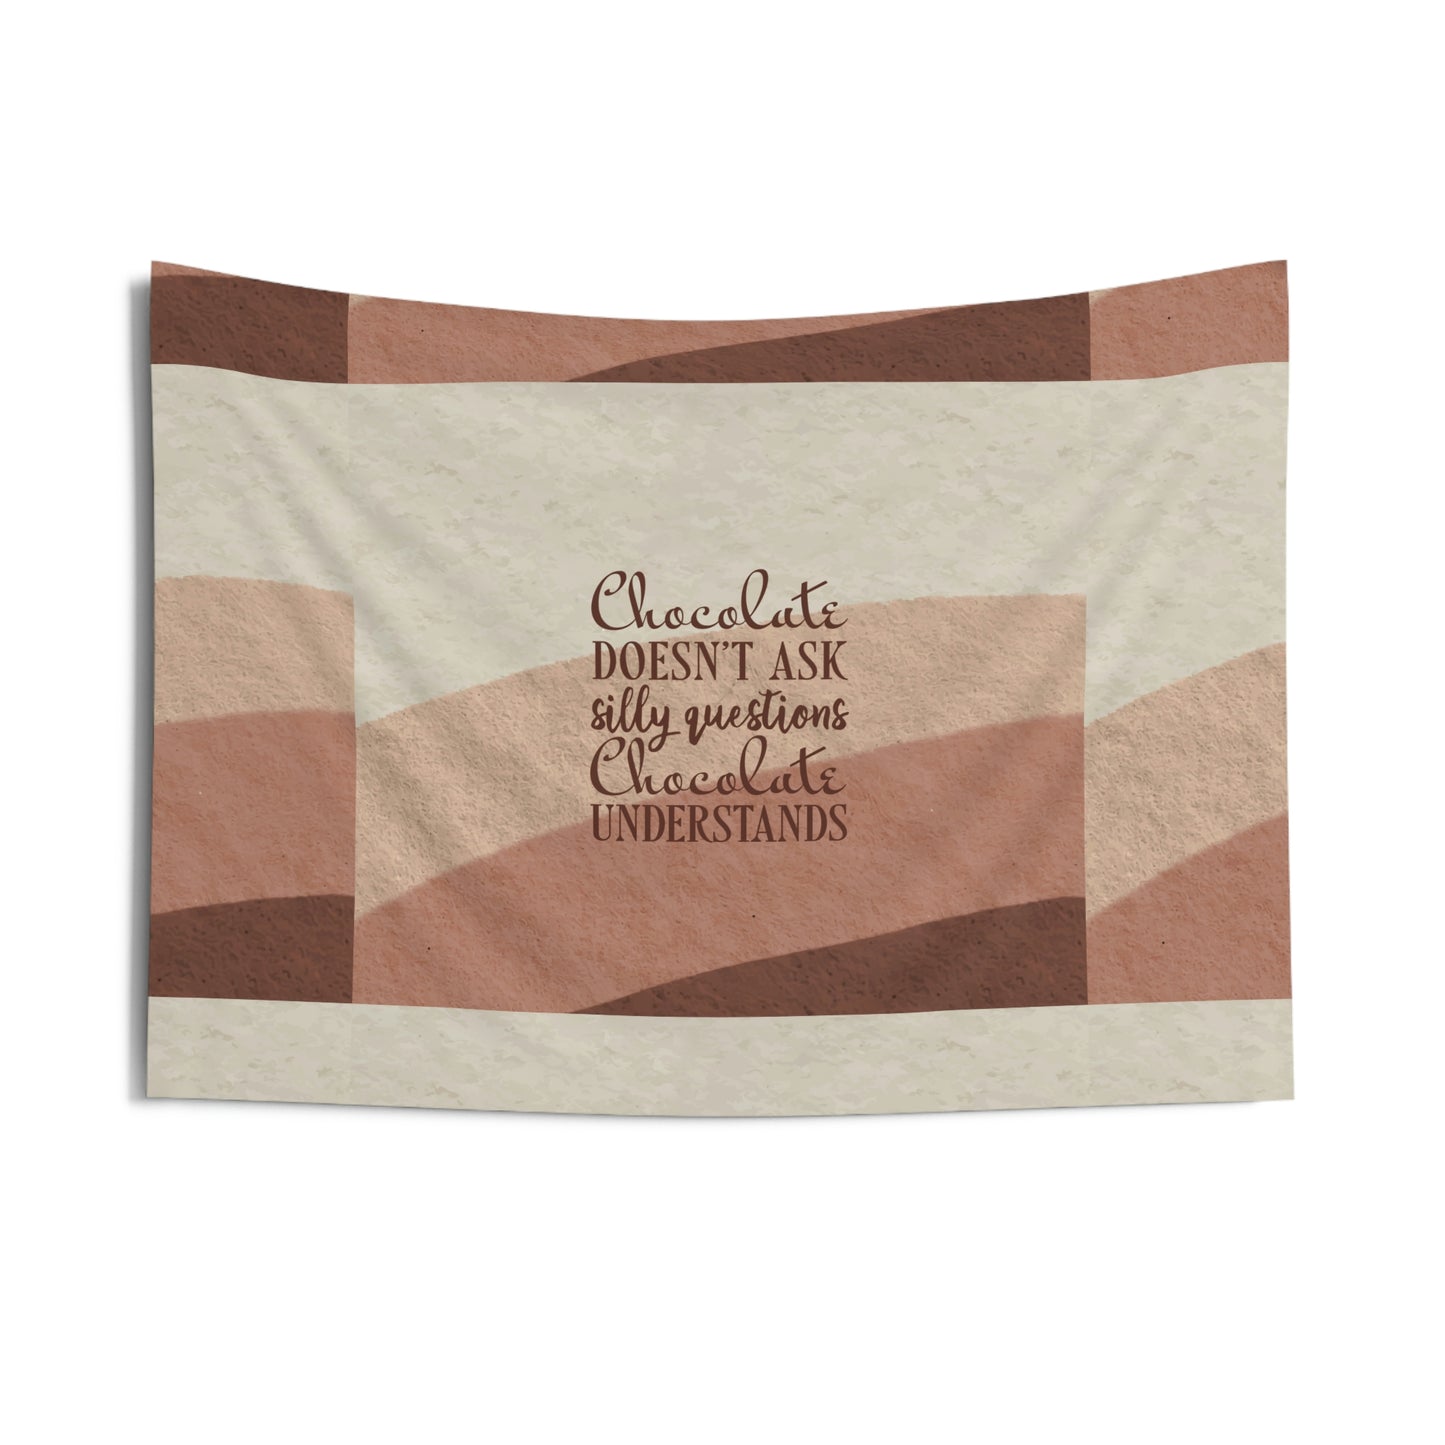 Chocolate Doesn’t Ask Questions Indulge in the Sweetness  Aesthetic Art Indoor Wall Tapestries